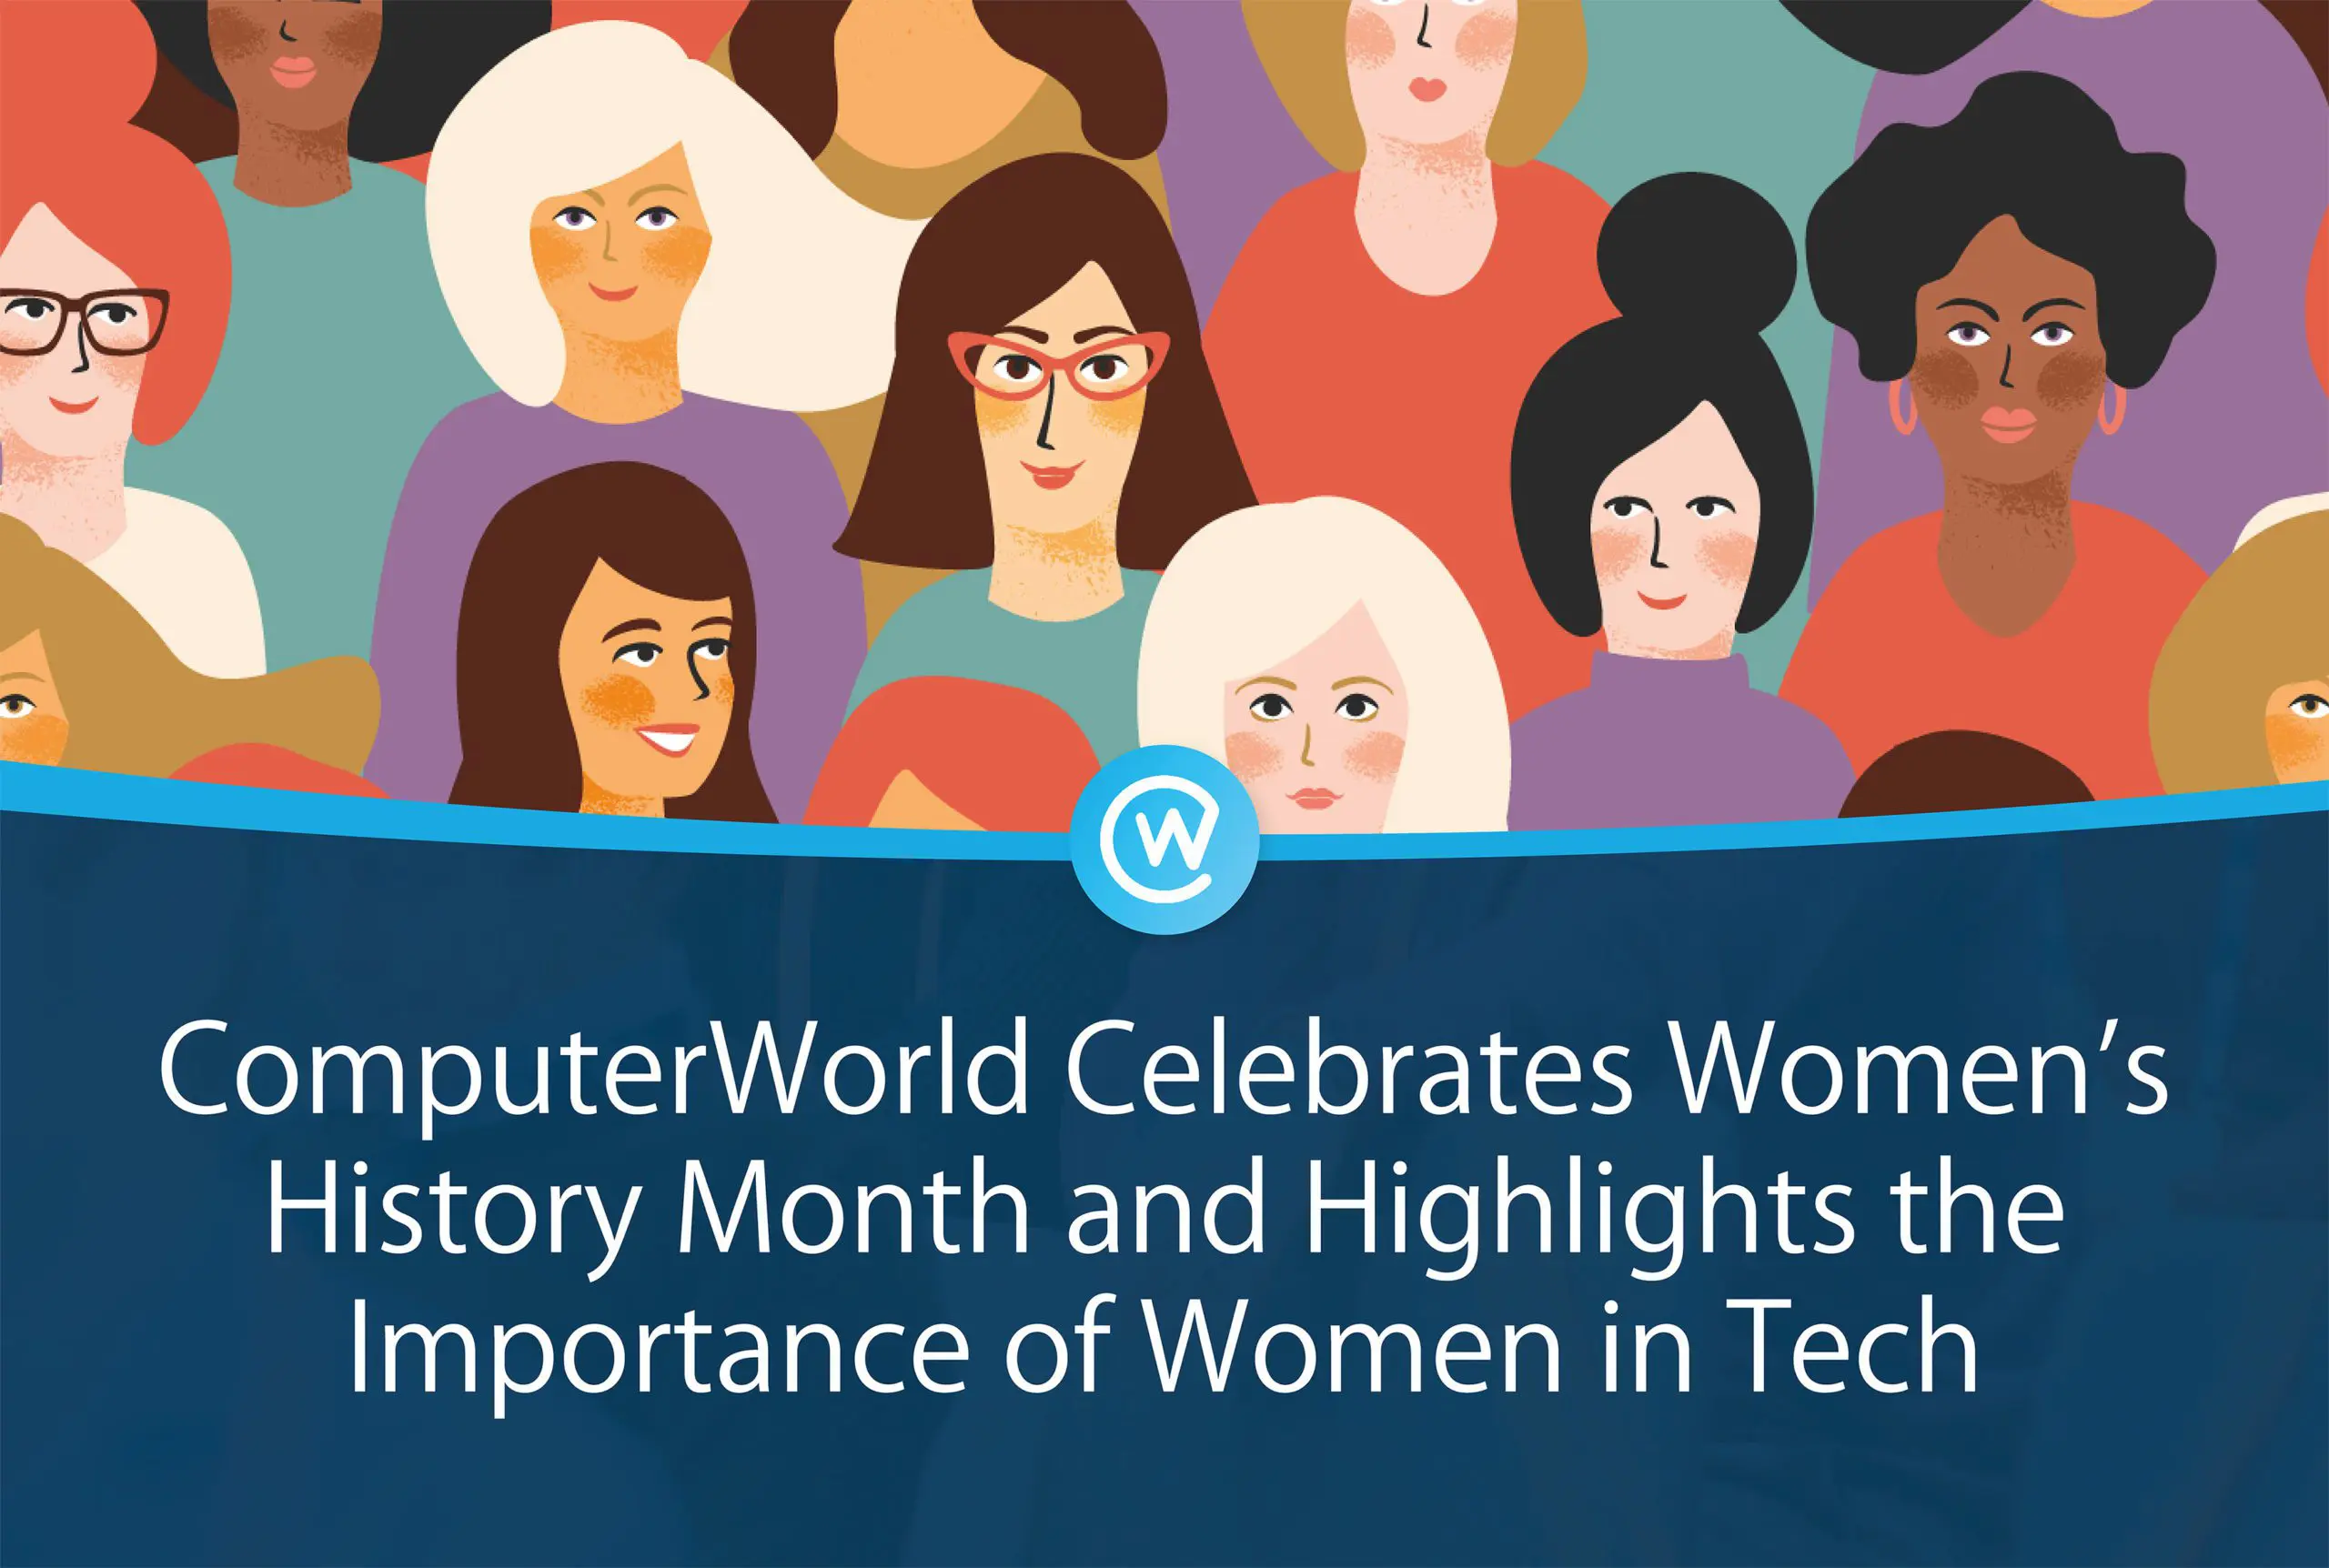 ComputerWorld Celebrates Women’s History Month and Highlight the Importance of Women in Tech